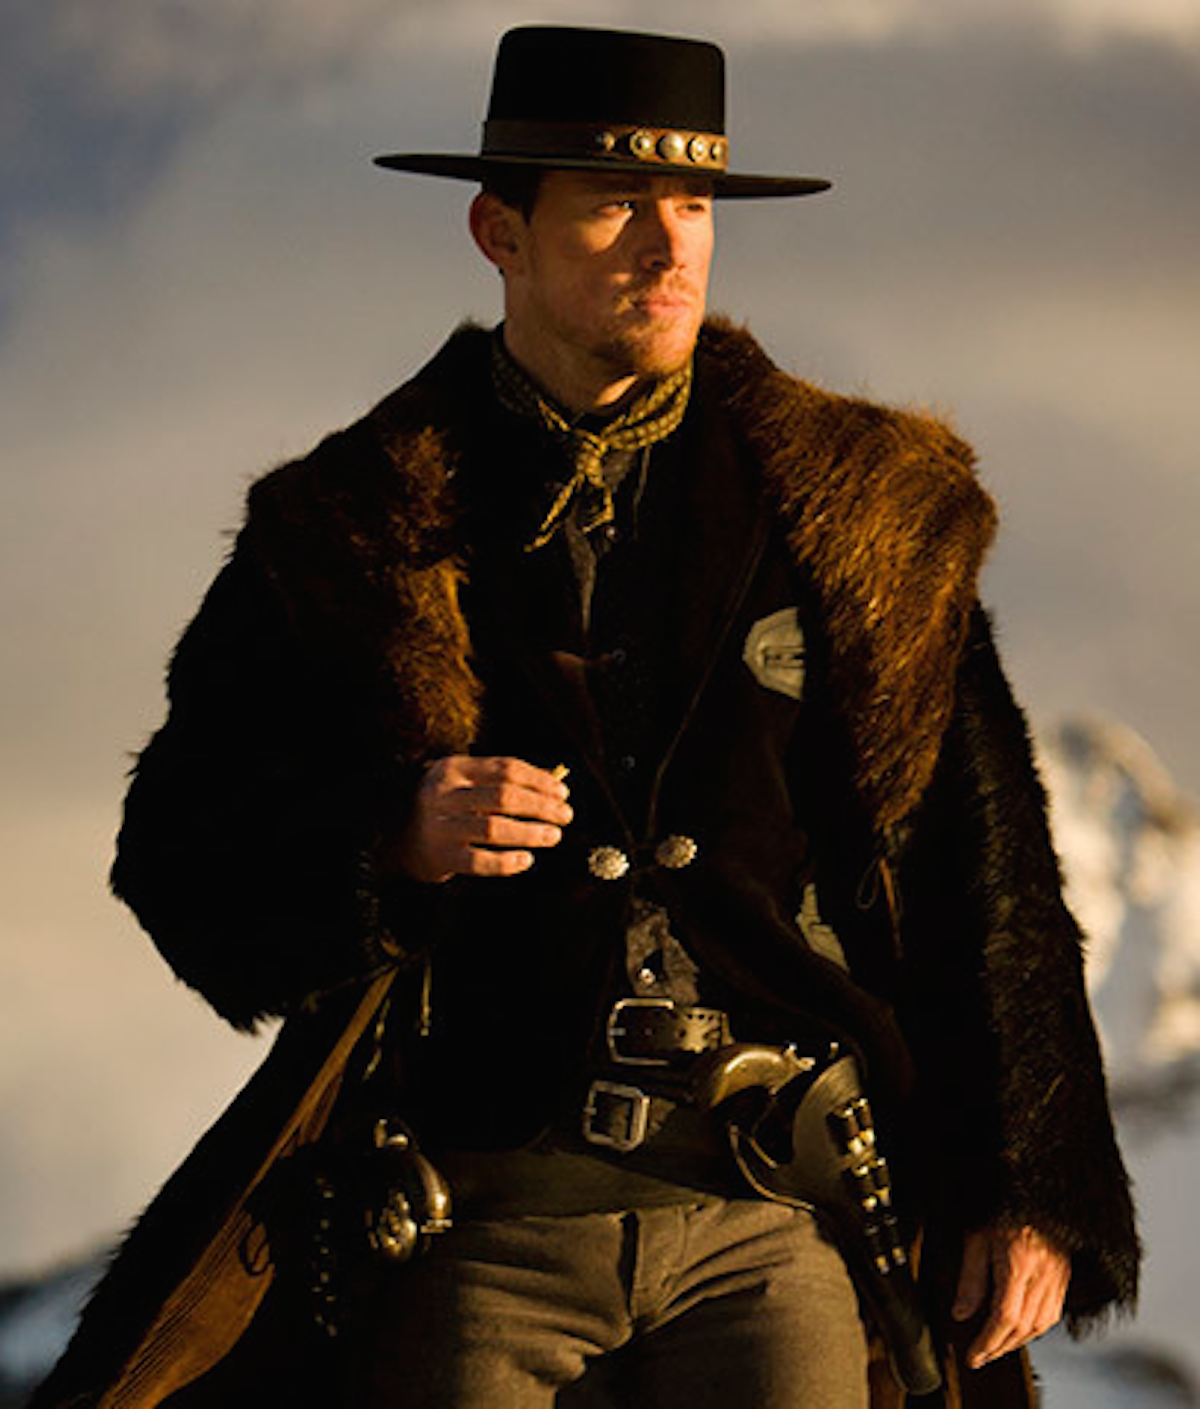 my new plaid pants: Channing Tatum is in The Hateful Eight